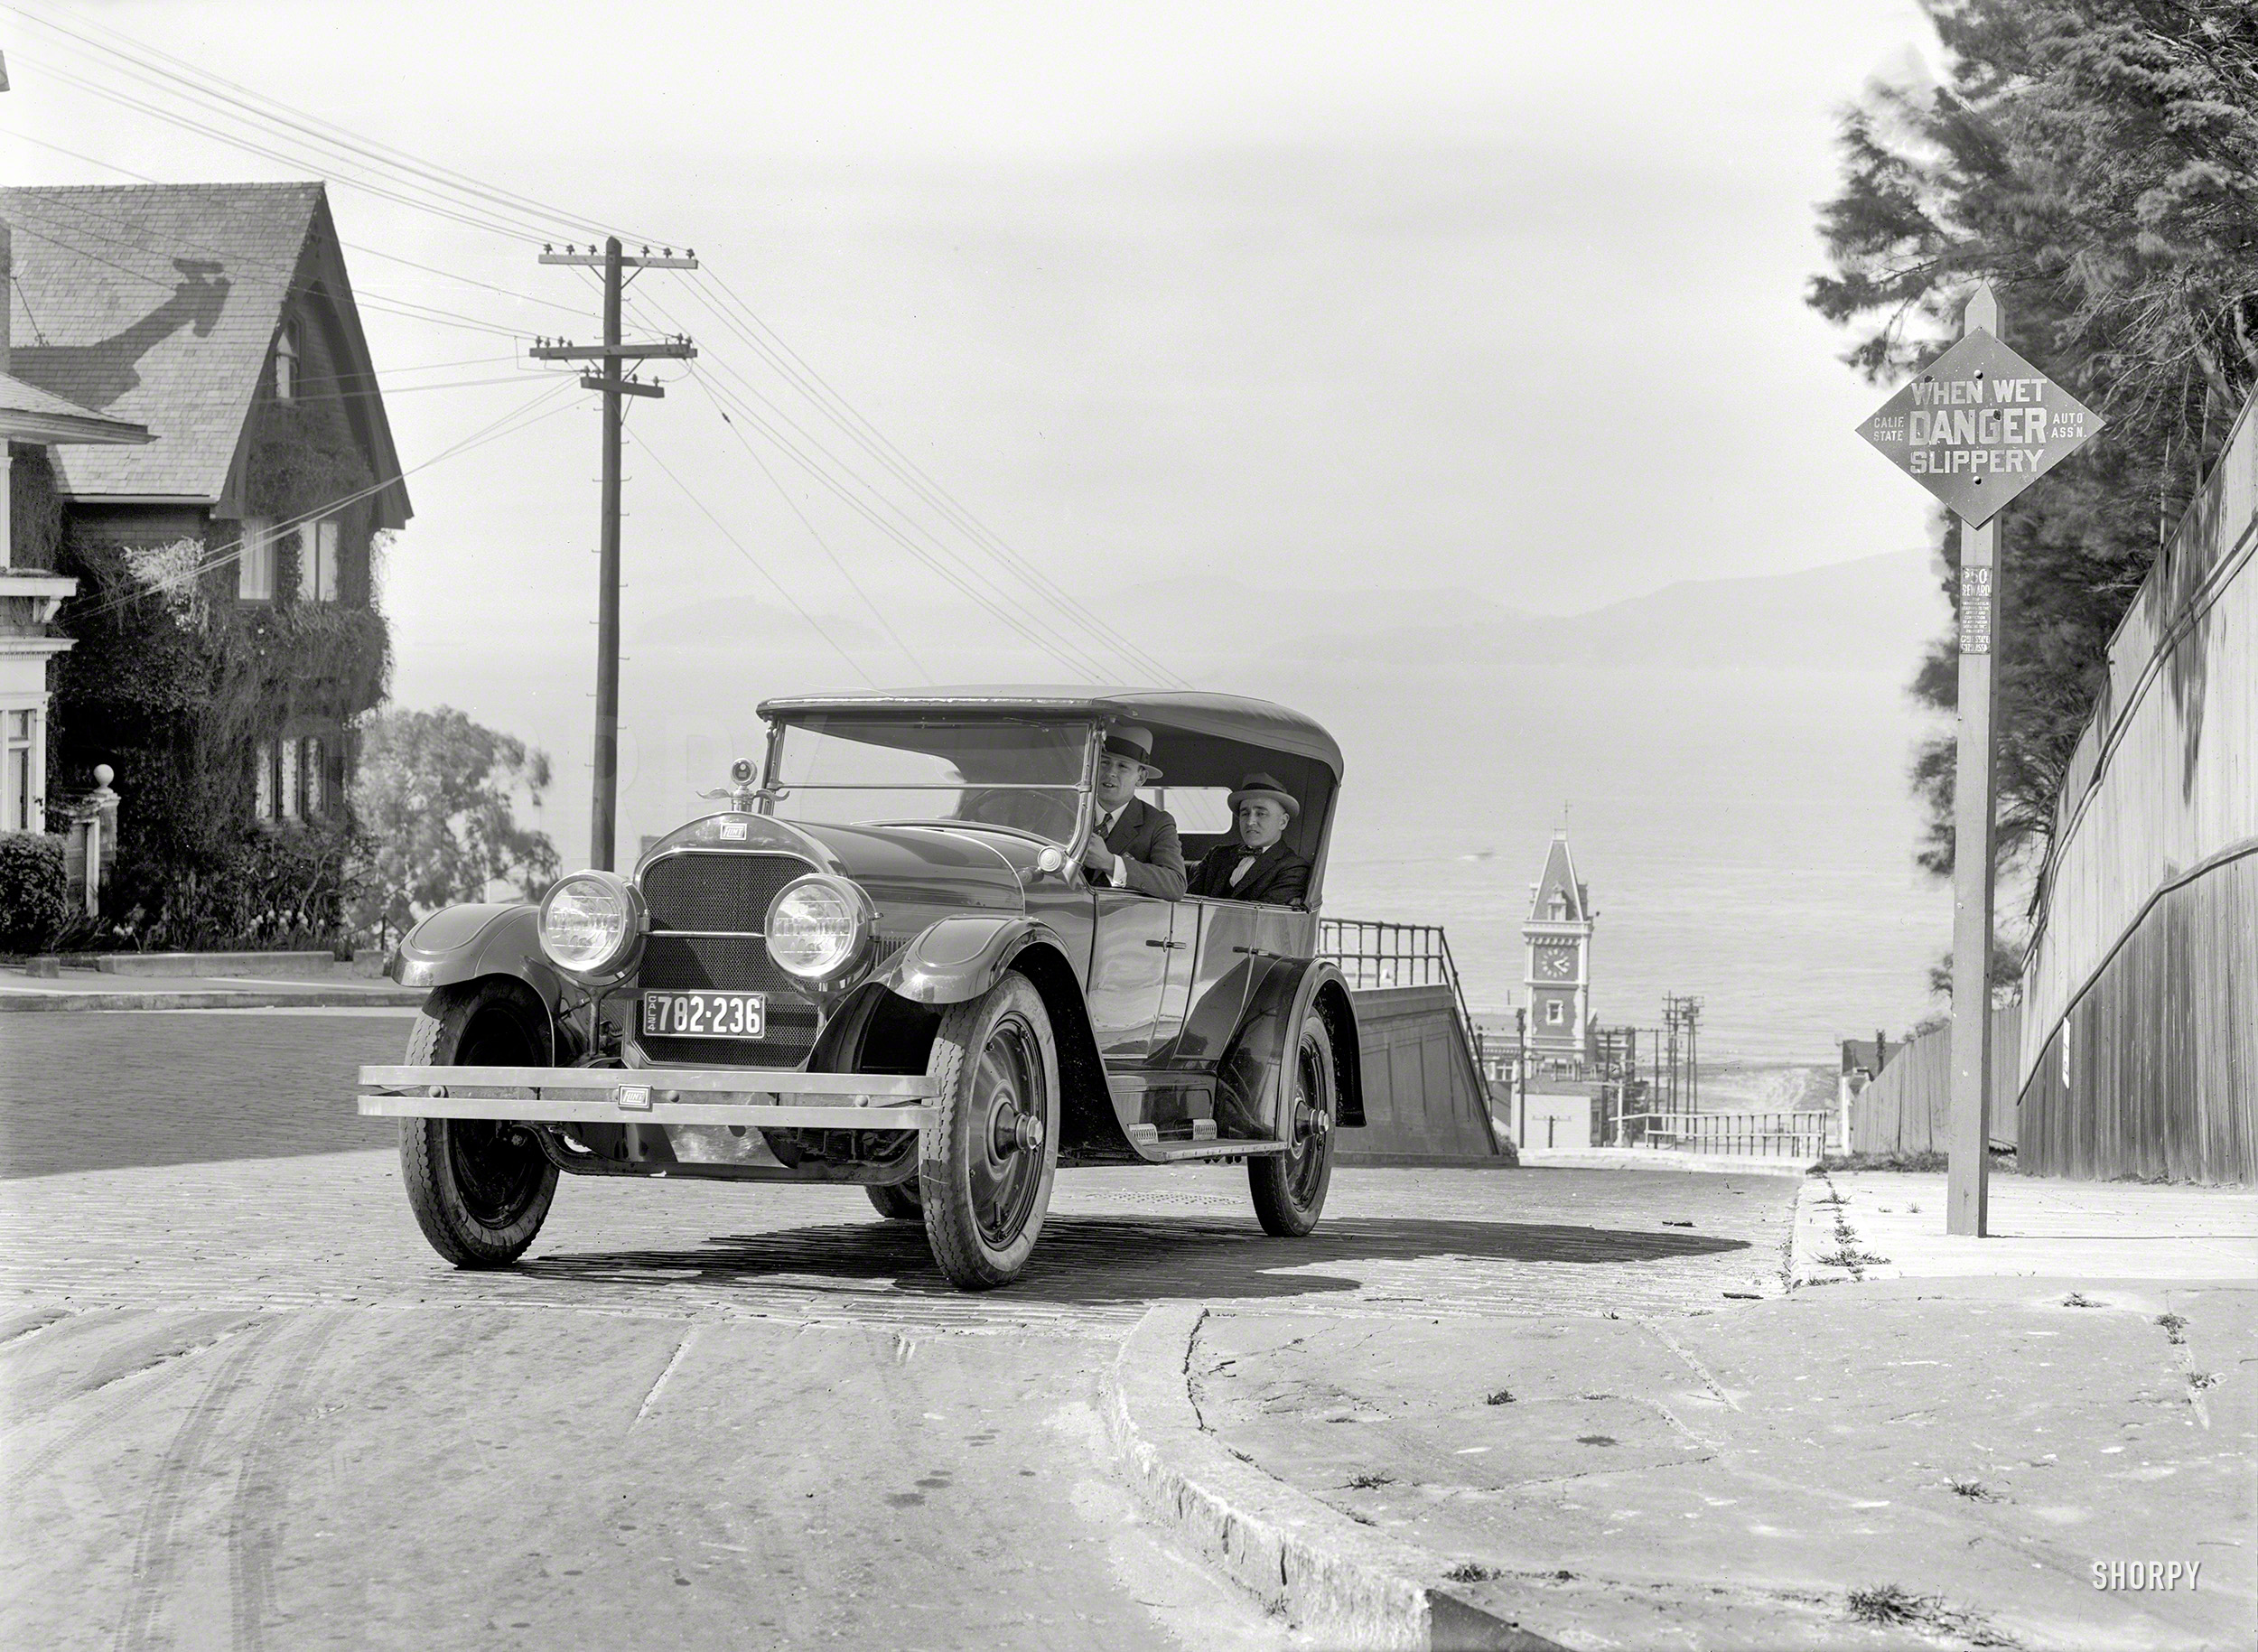 "Flint auto in San Francisco, 1924." With the Ghirardelli Square clock tower keeping time for whatever conversation is taking place between the front seat and the back. 5x7 inch glass negative by Christopher Helin. View full size.